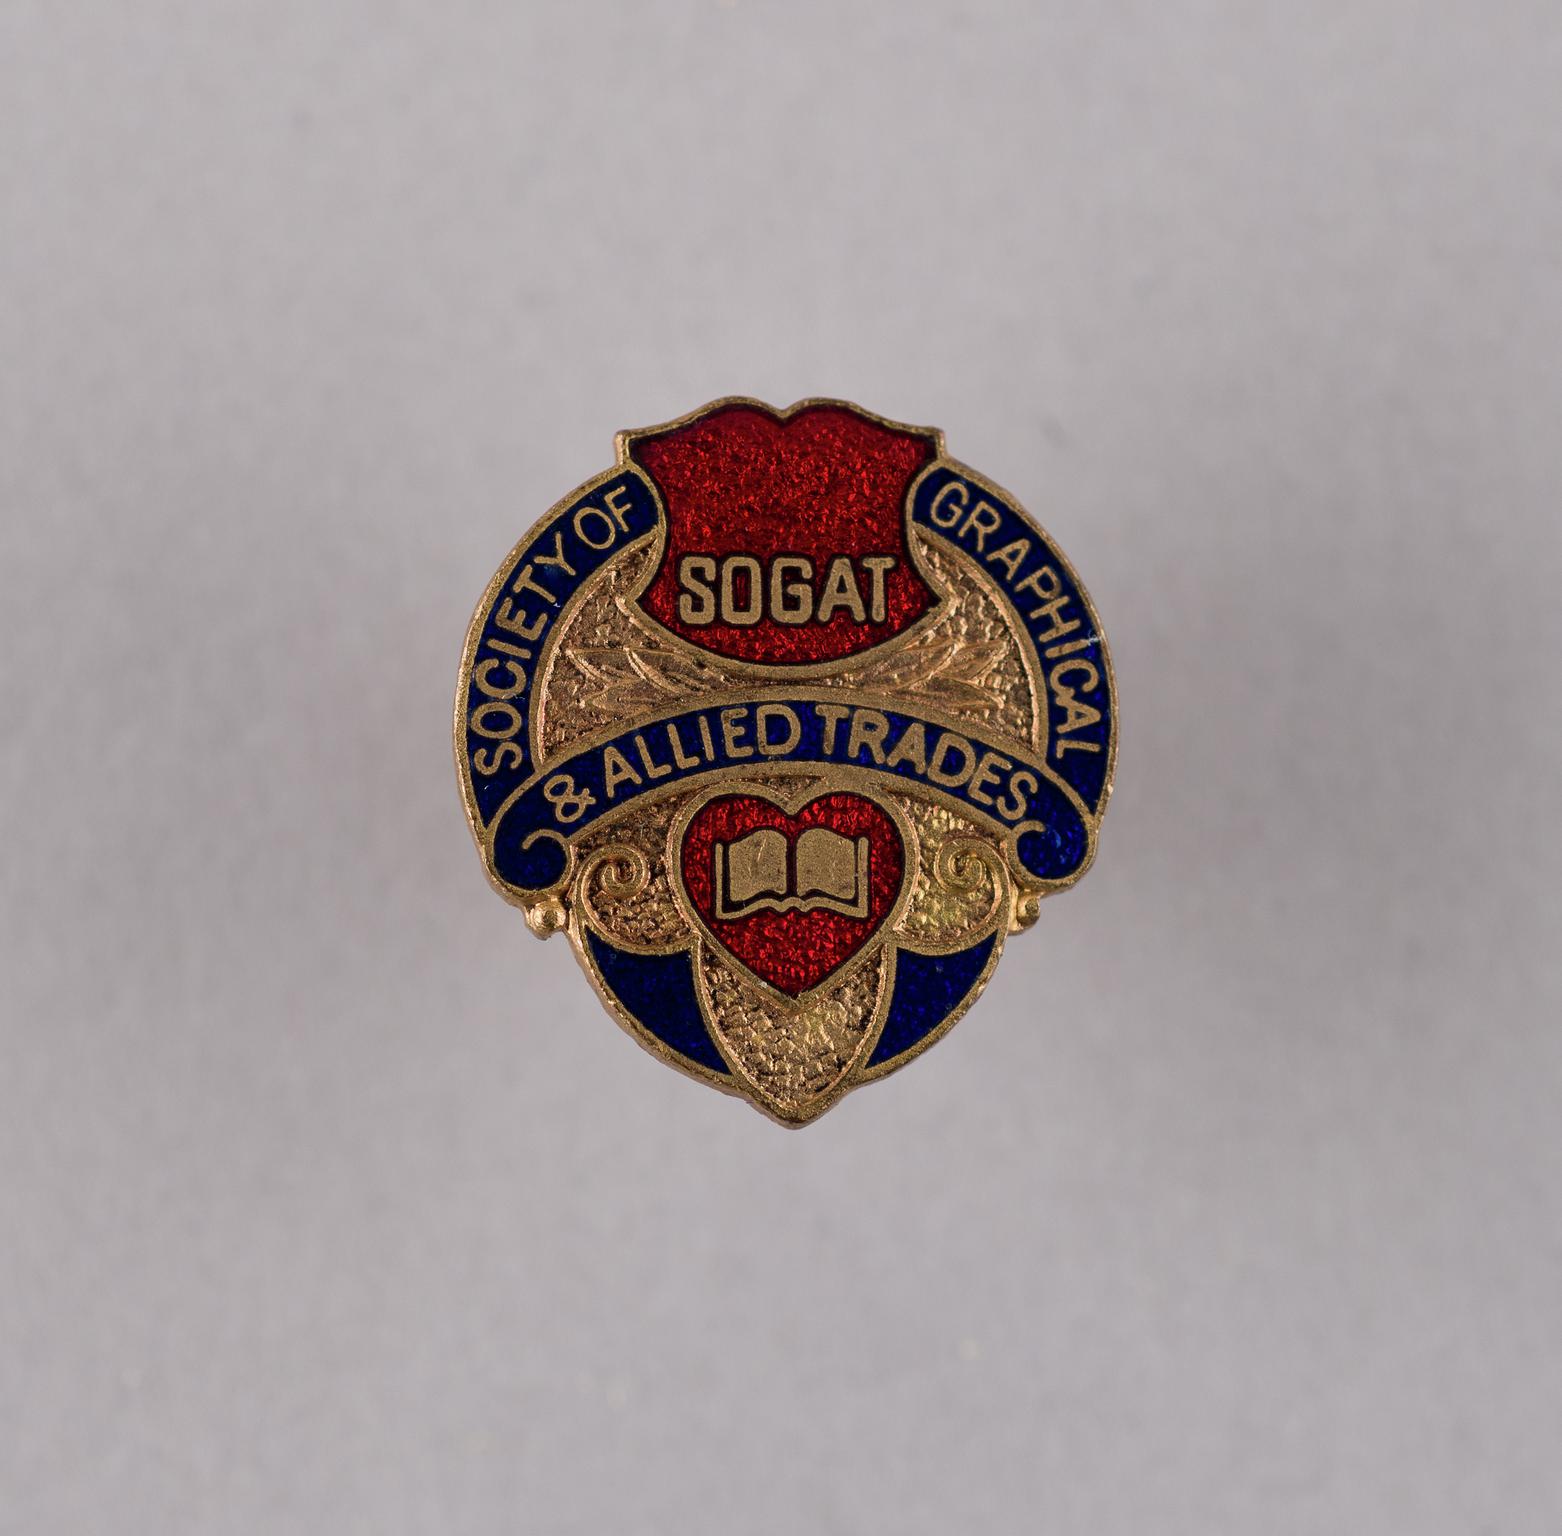 Society of Graphical & Allied Trades, badge